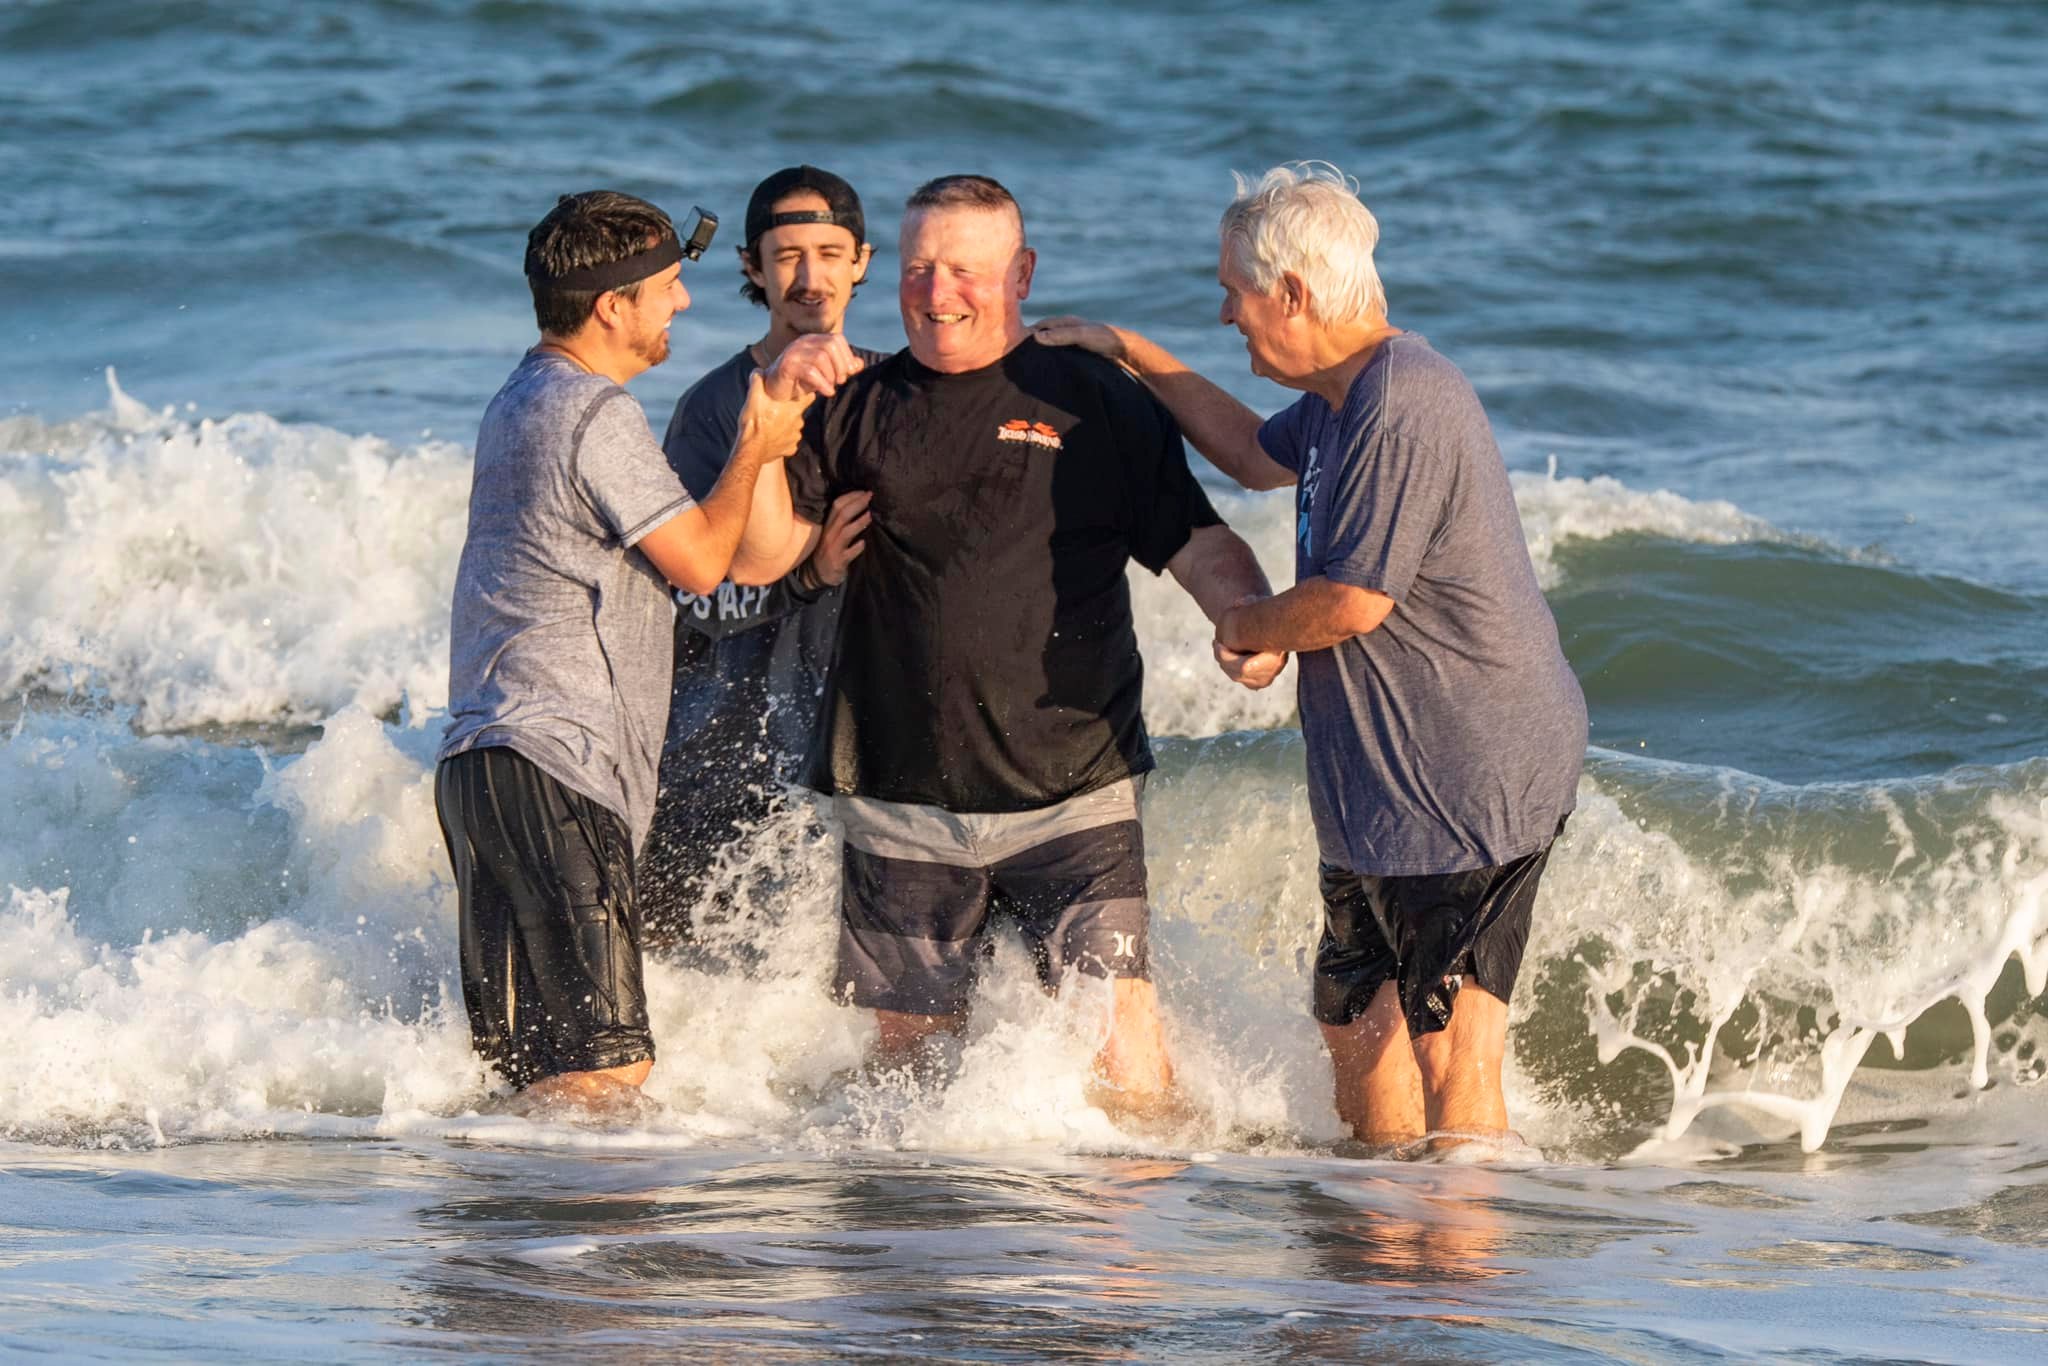 Church Planting in Myrtle Beach’s Wave of Growth